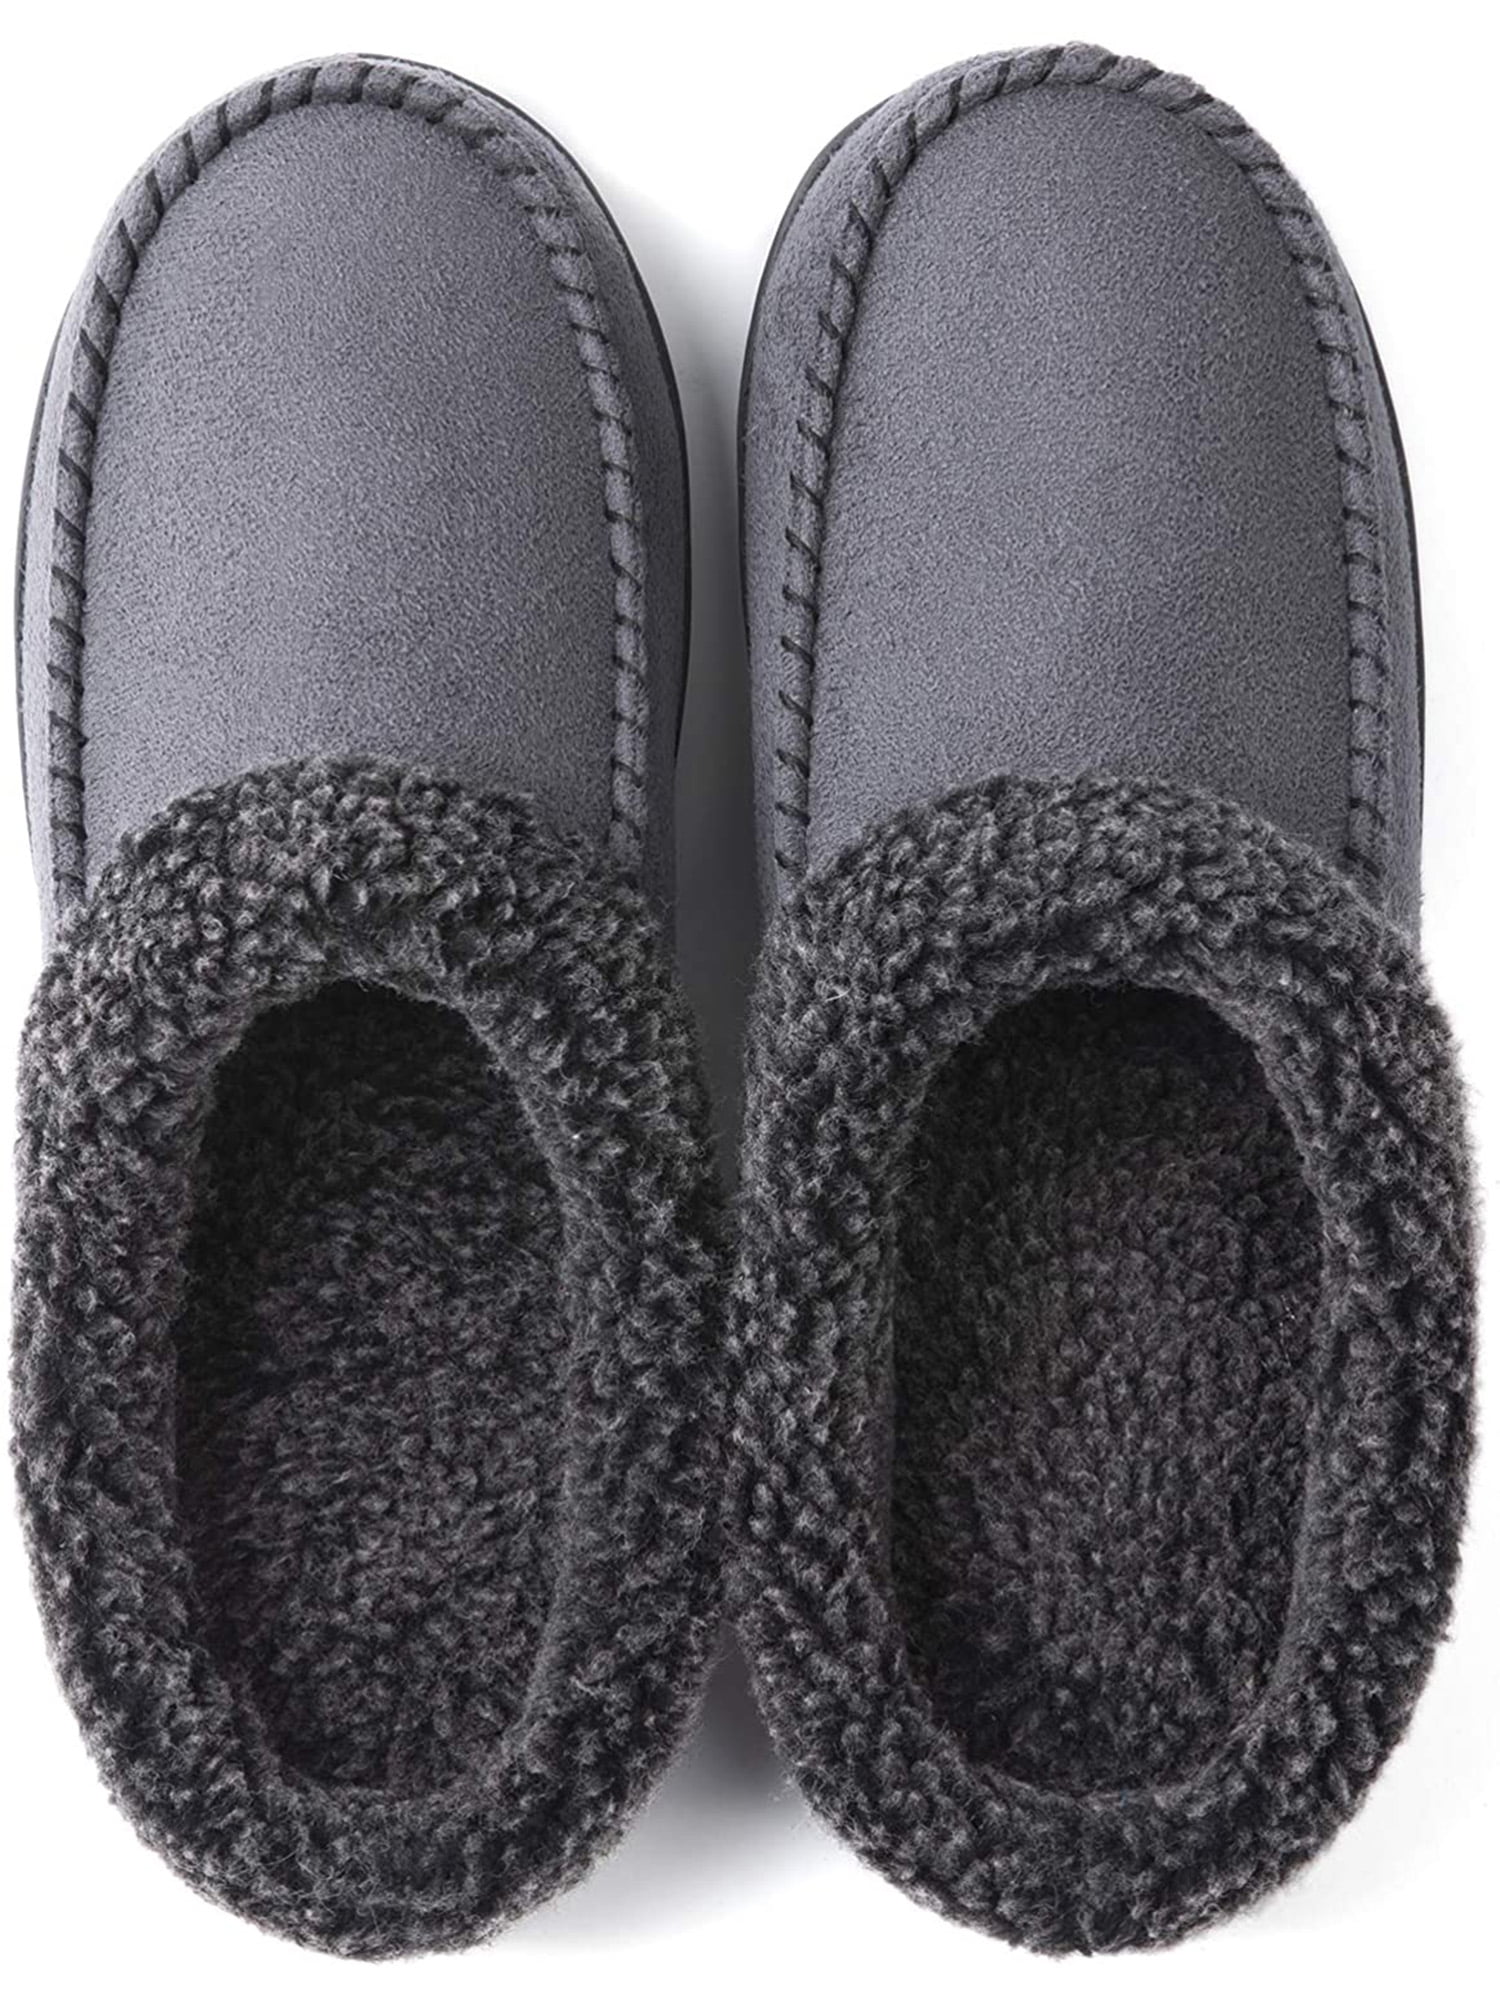 Slip on Clog House Shoes with Indoor Outdoor Anti-Skid Rubber Sole ULTRAIDEAS Men's Cozy Memory Foam Slippers with Fuzzy Plush Wool-Like Lining